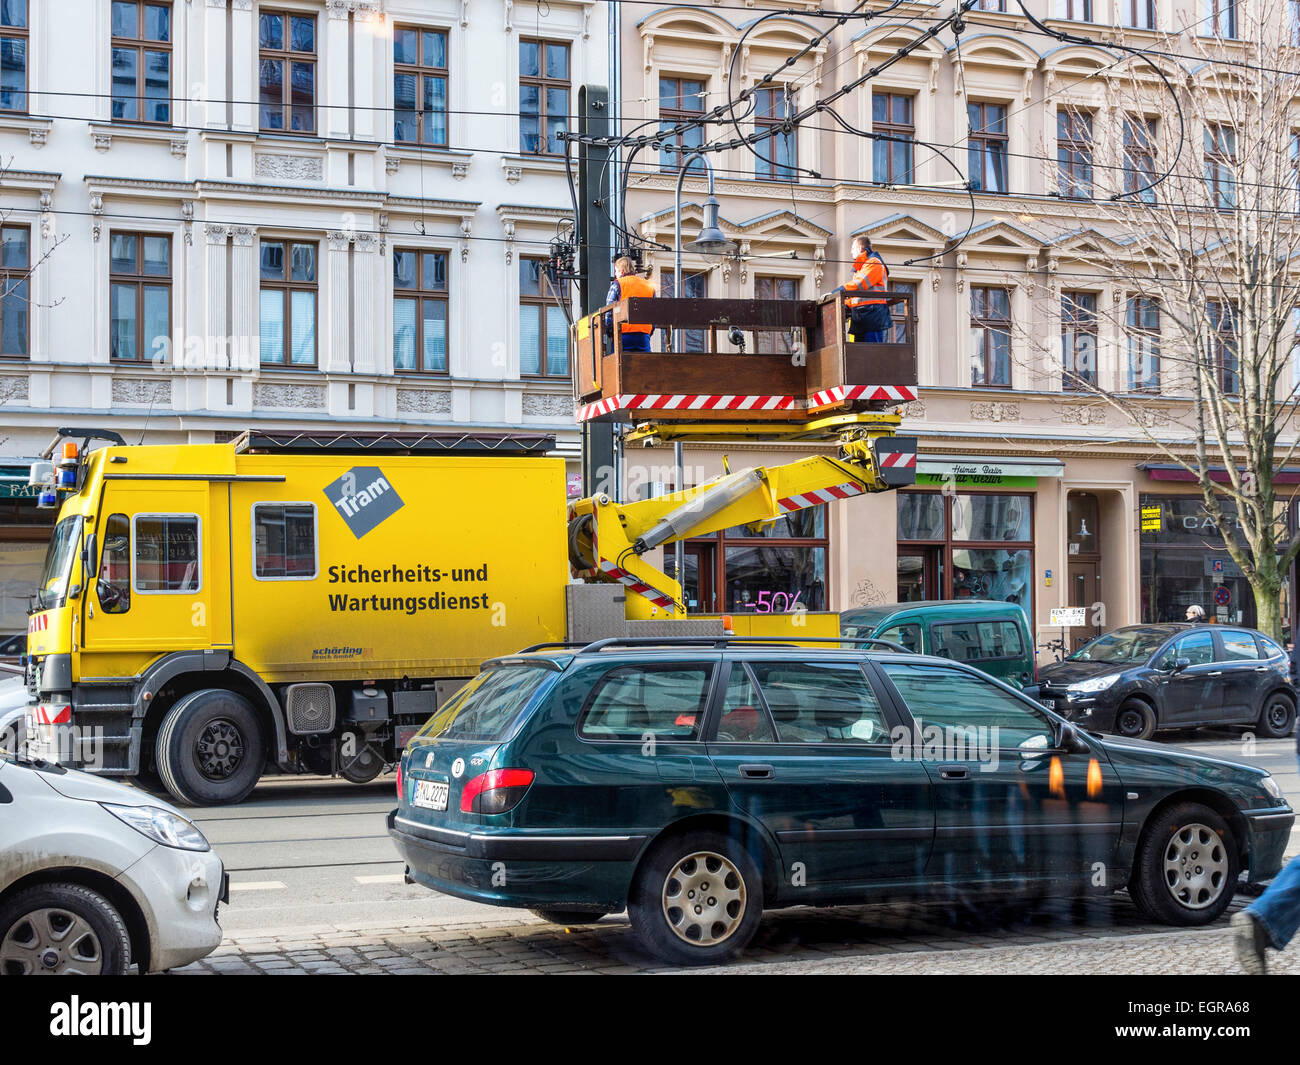 Berlin tram repair and safety service - truck and two engineers repairing overhead tram wires, Germany Stock Photo